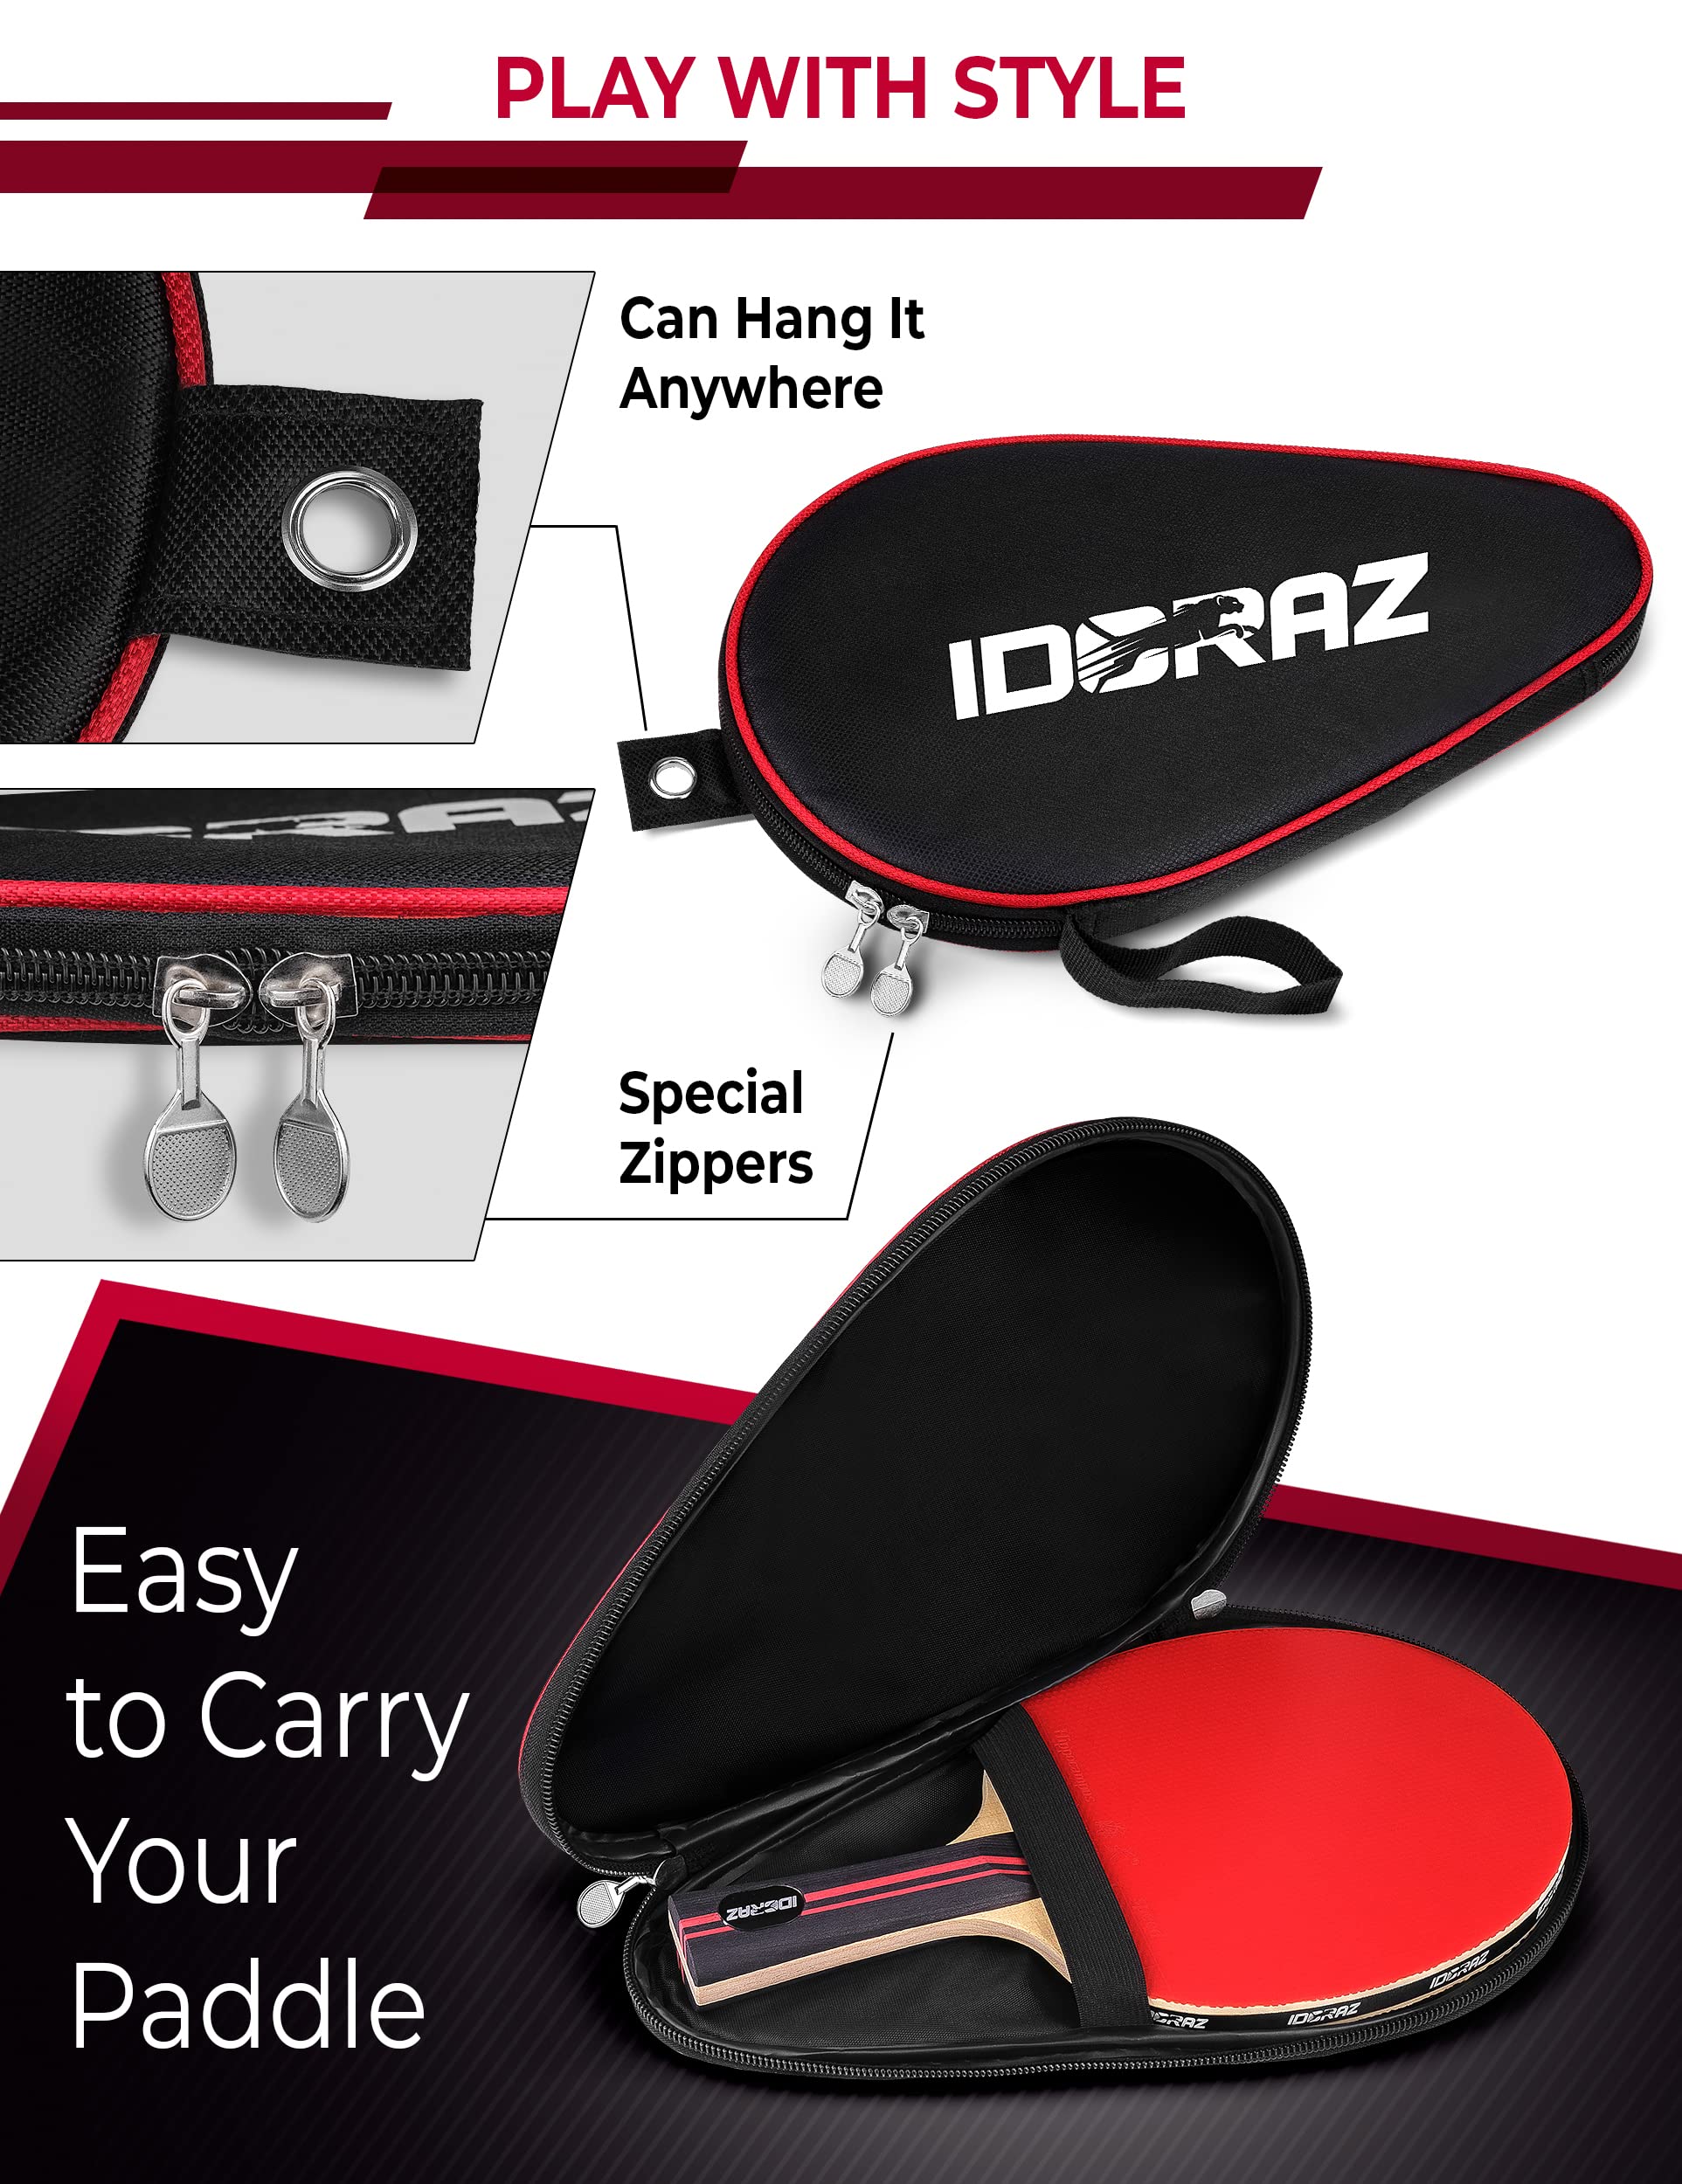 Idoraz Table Tennis Racket Professional Paddle - Ping Pong Racket with Carrying Case - ITTF Approved Rubber for Tournament Play